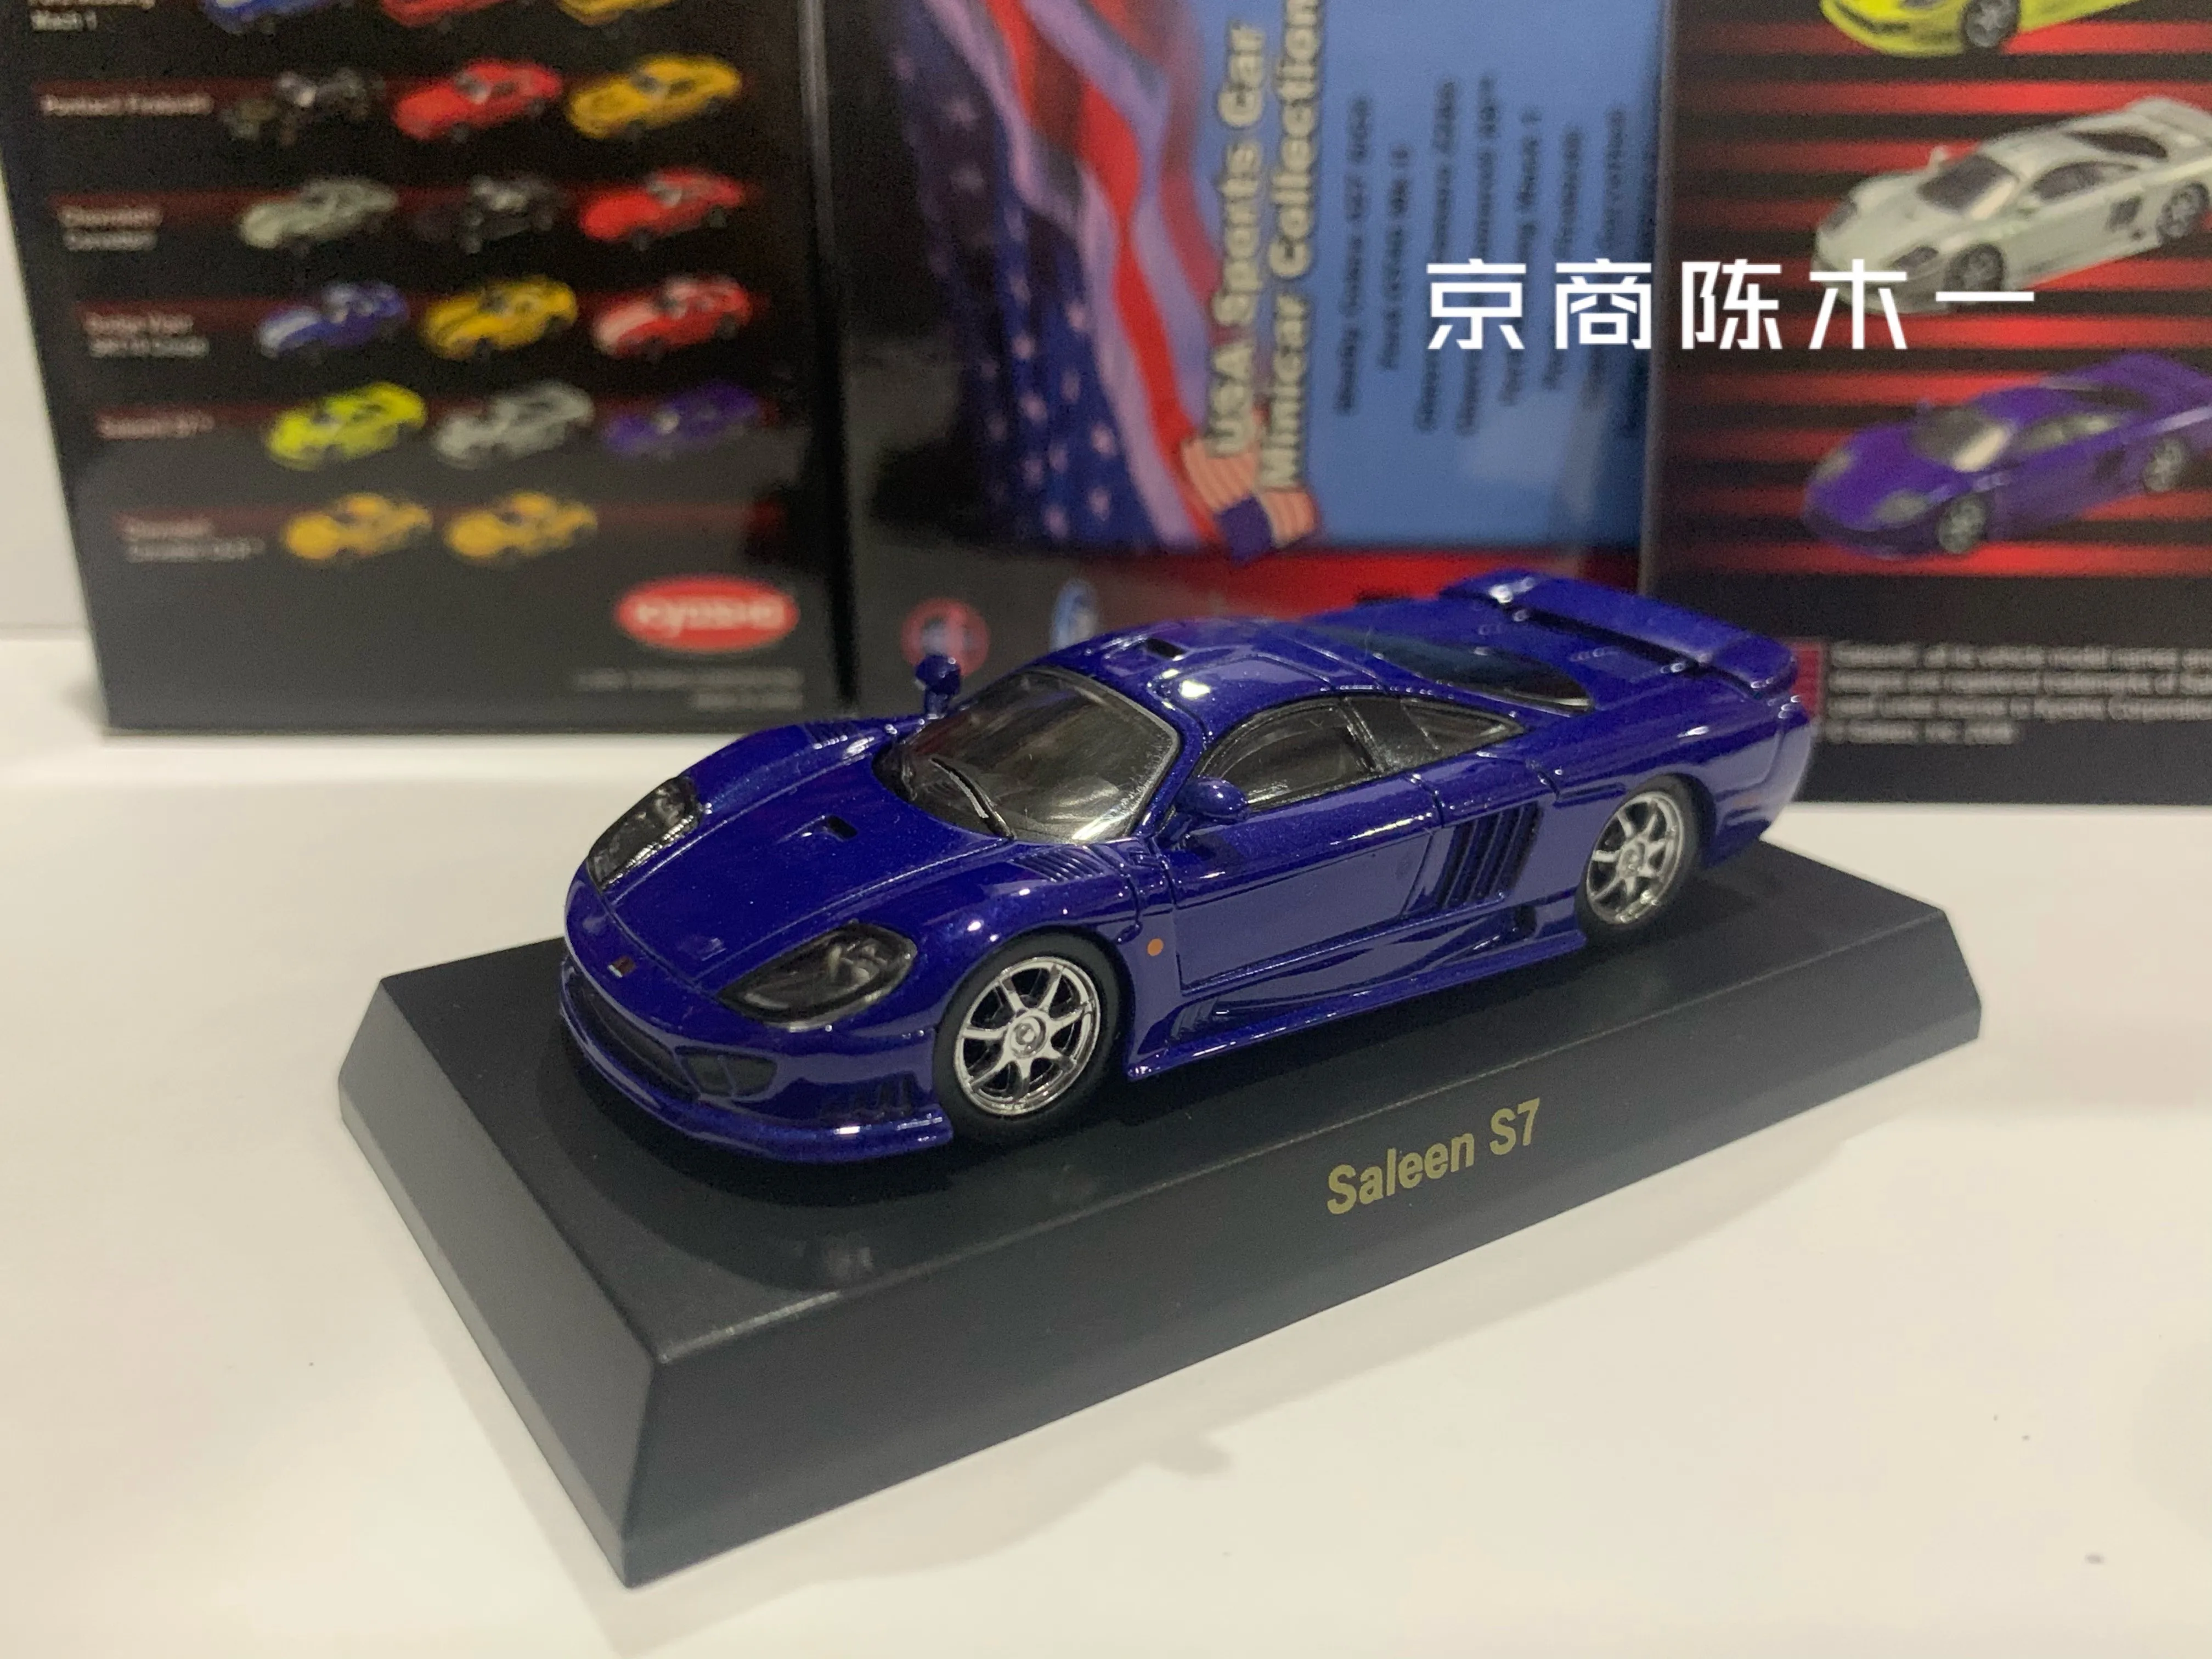 

1/64 KYOSHO Saleen S7 Collection of die-cast alloy car decoration model toys